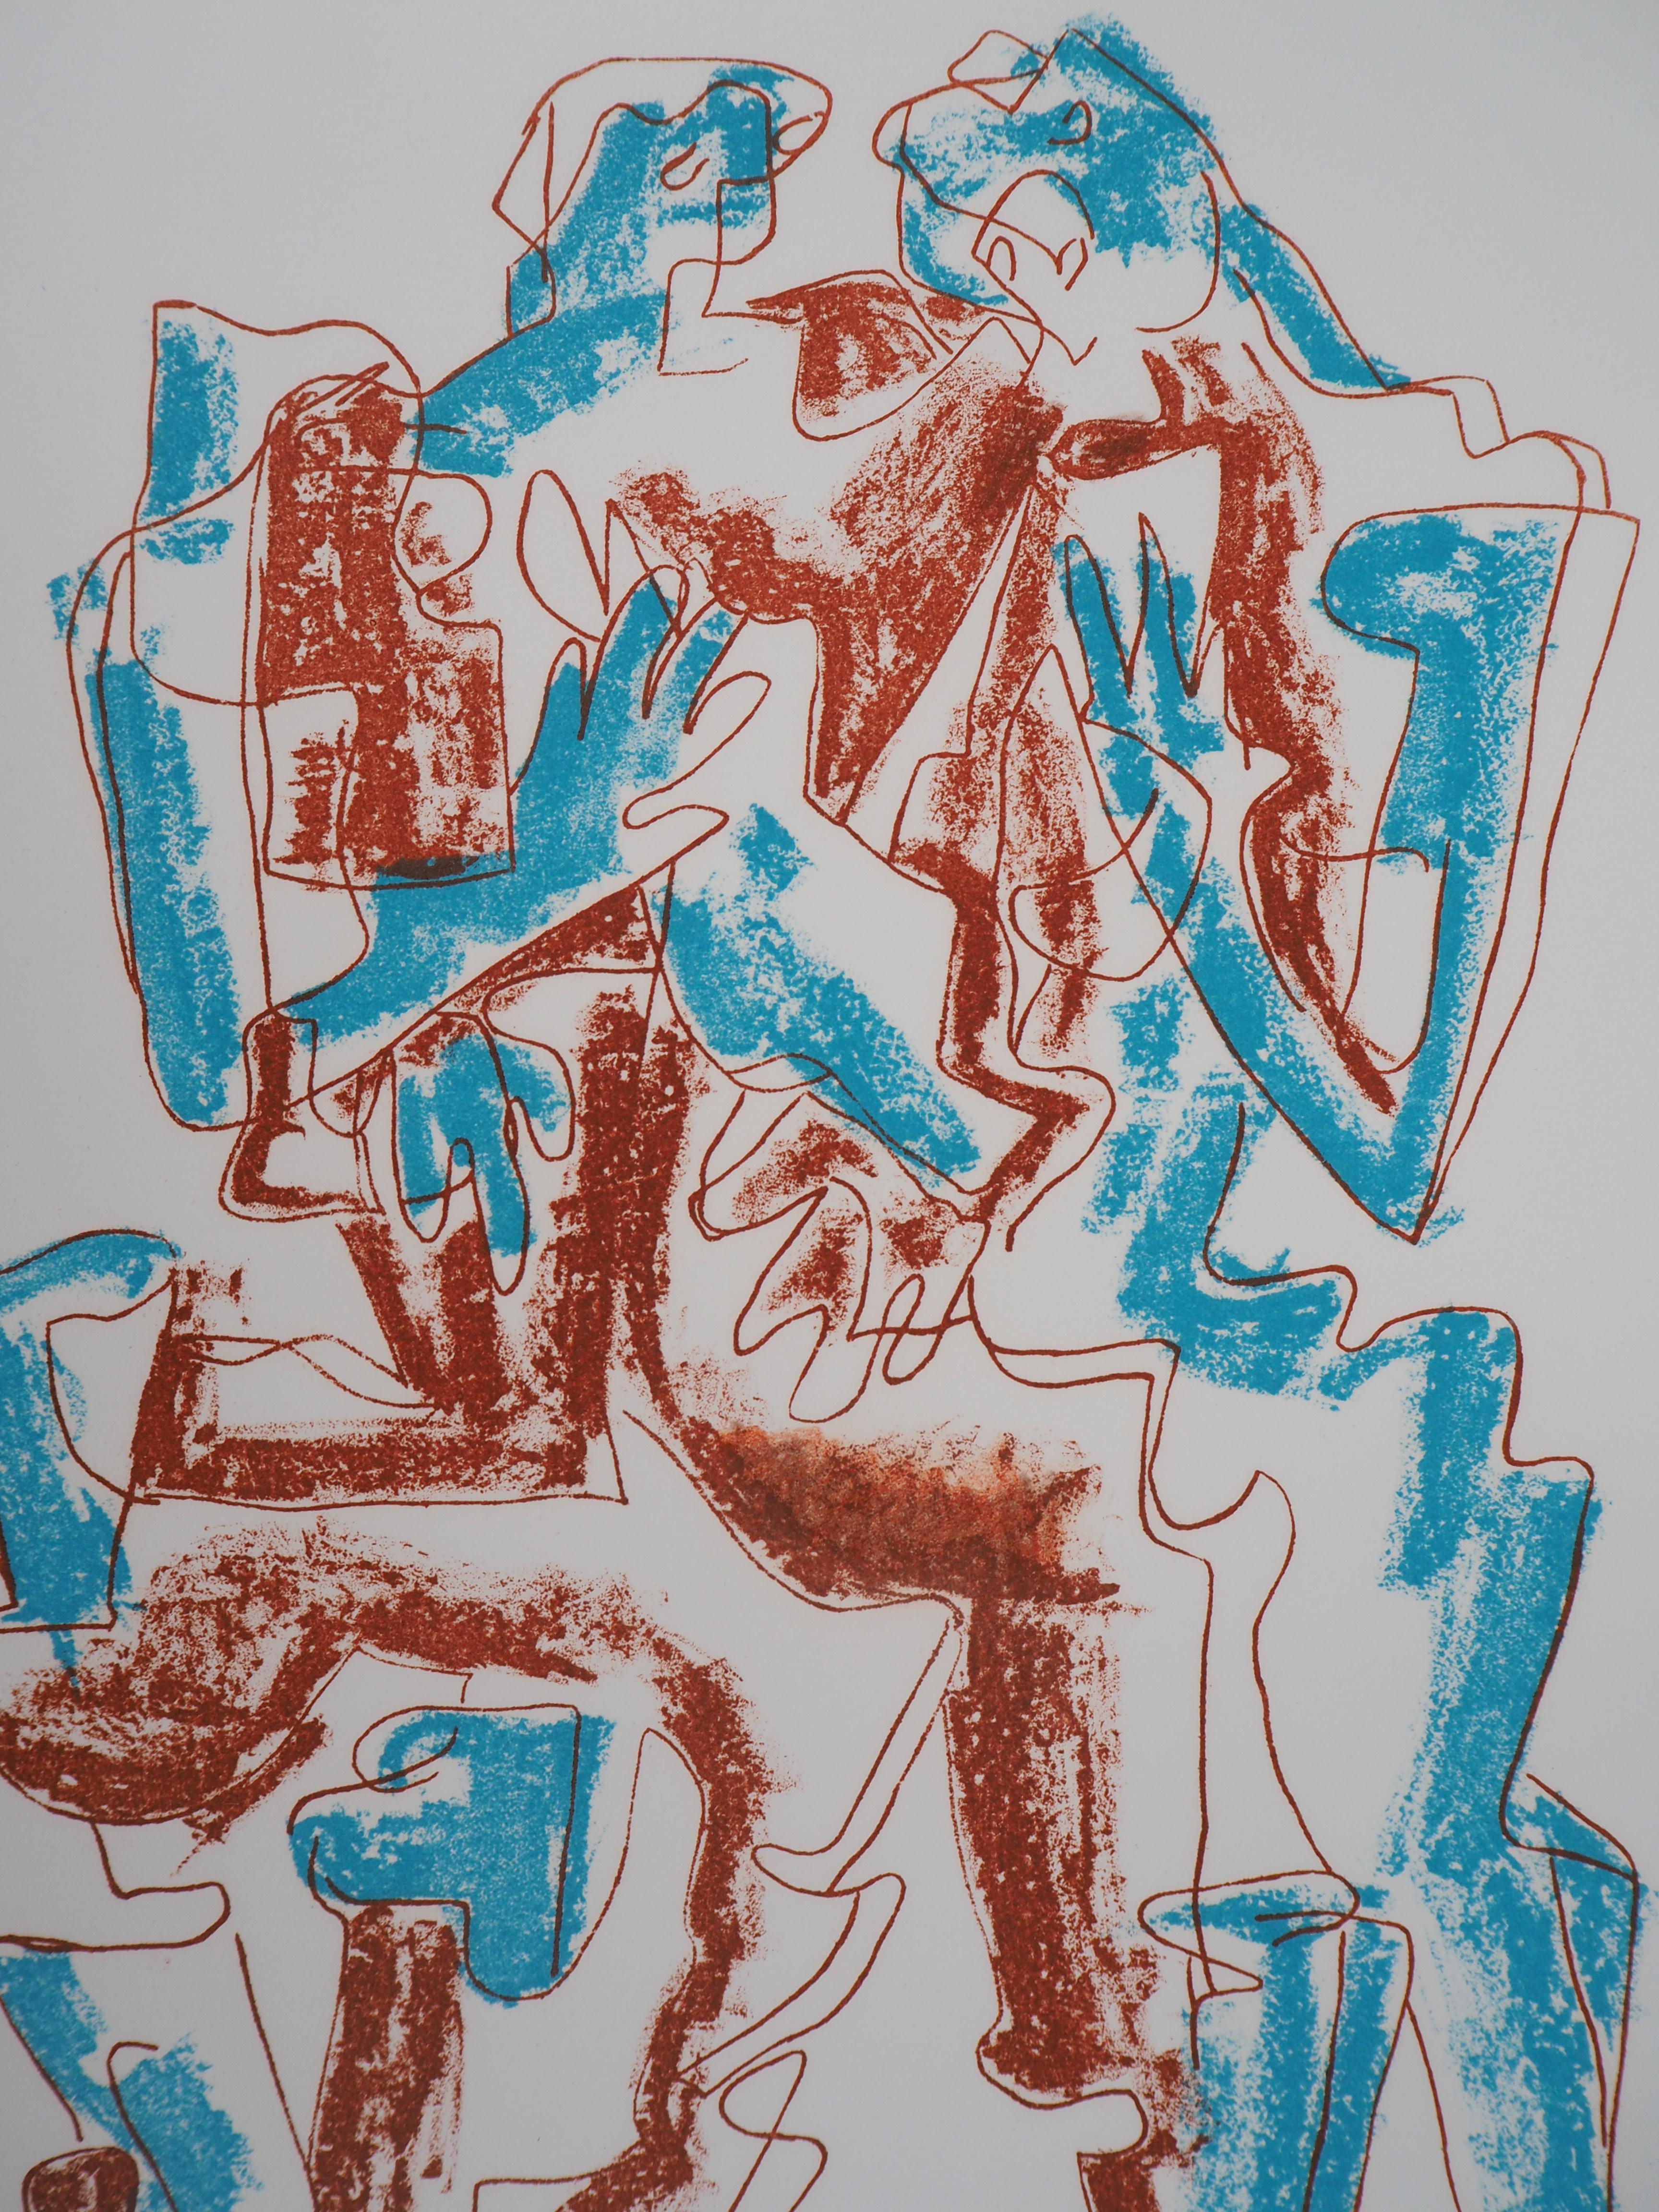 Ossip ZADKINE
Hugging Couple, 1966

Original lithograph
Handsigned in pencil
On Rives vellum 37 x 28 cm (c. 15 x 11 inch)

INFORMATION : It's the last lithograph created by Zadkine.

Excellent condition 